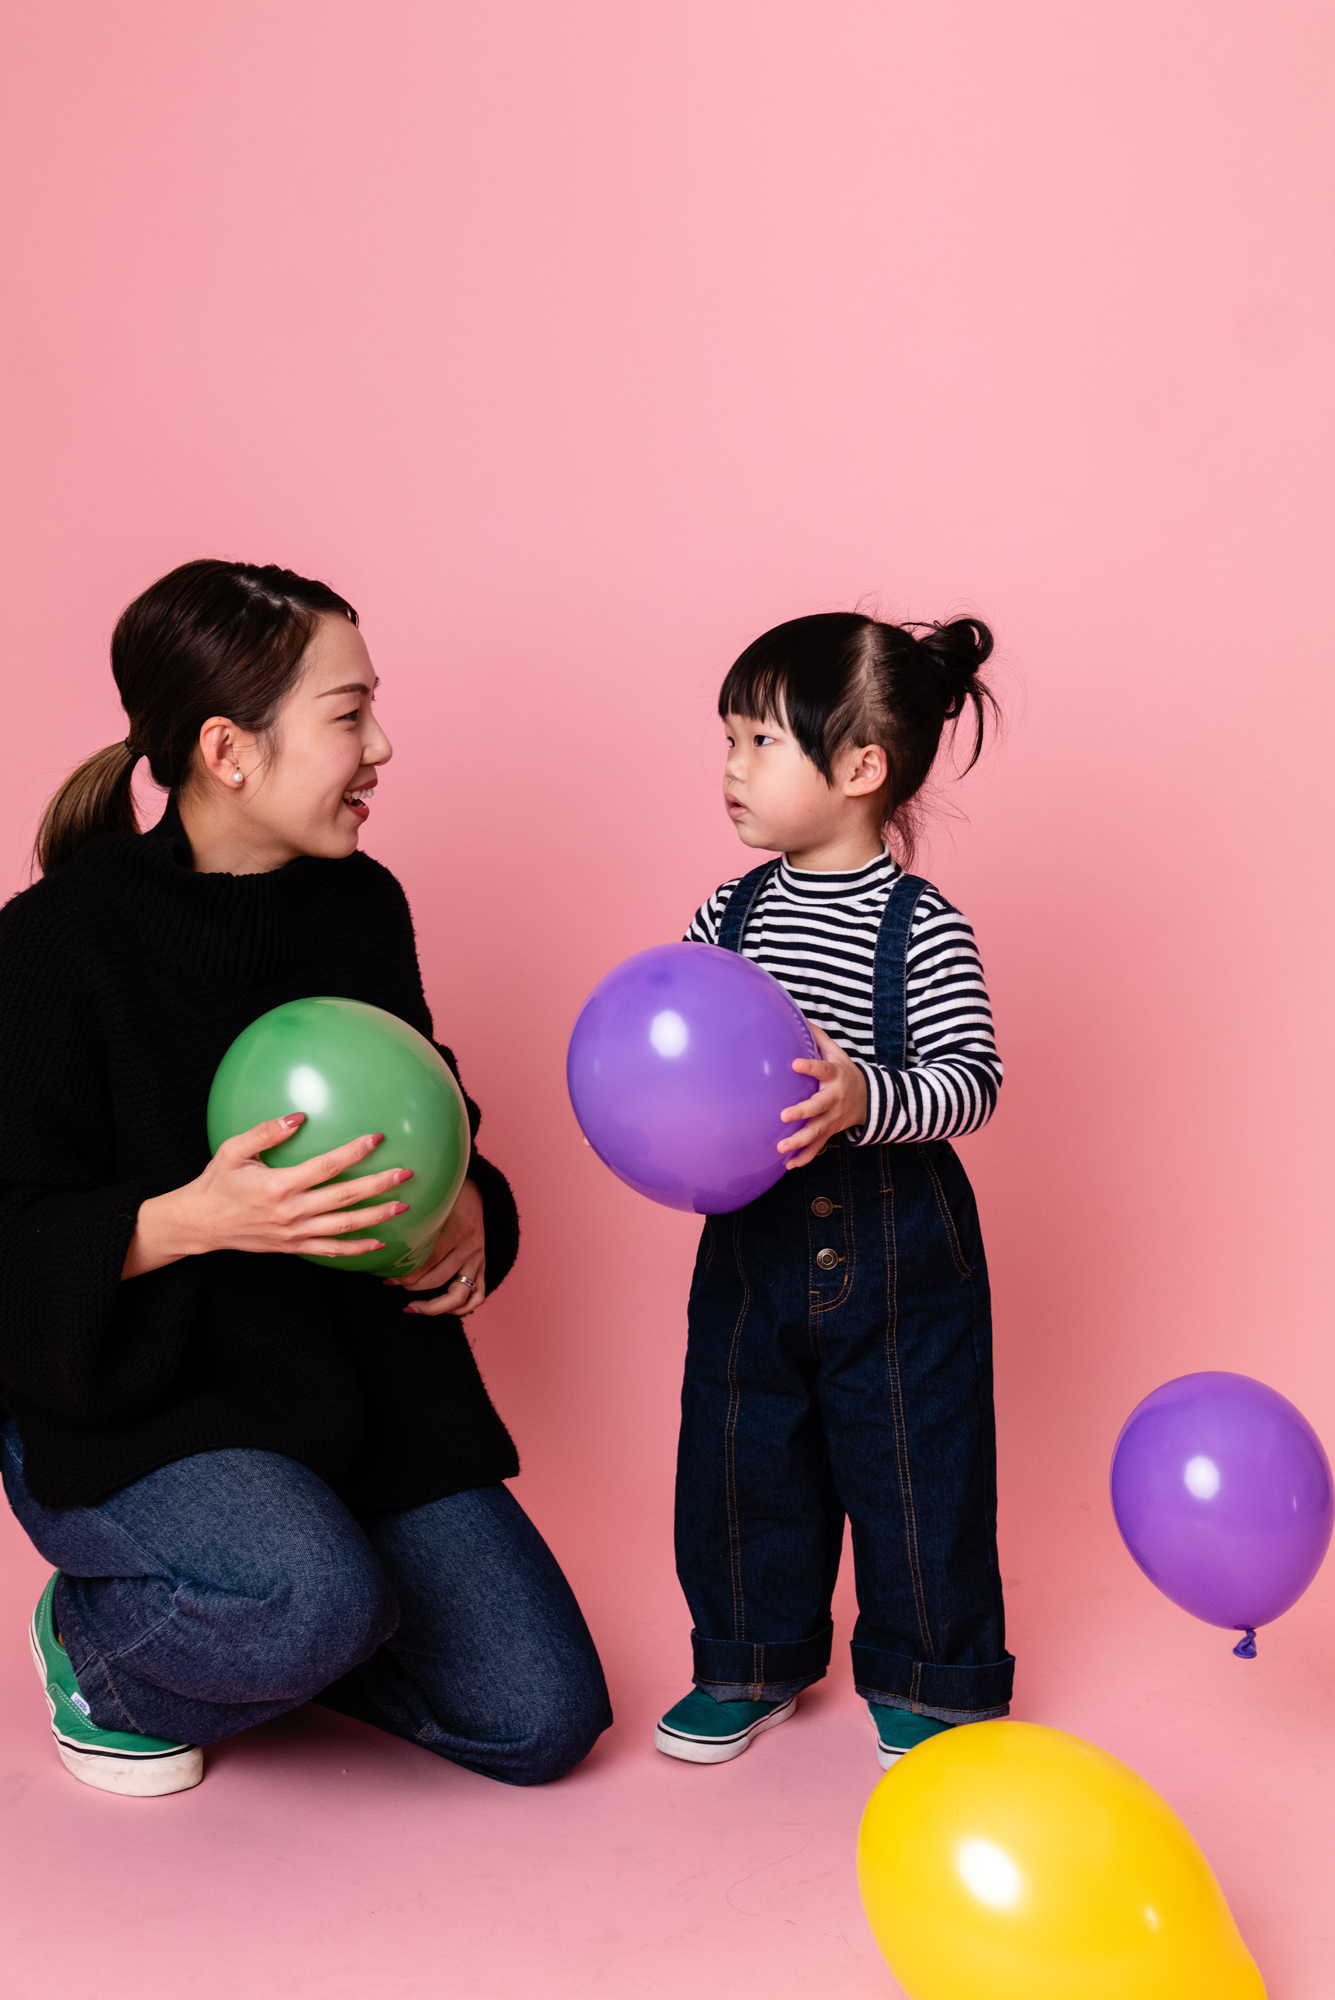 Adorable Mother and Child Photoshoot | Balloons as props